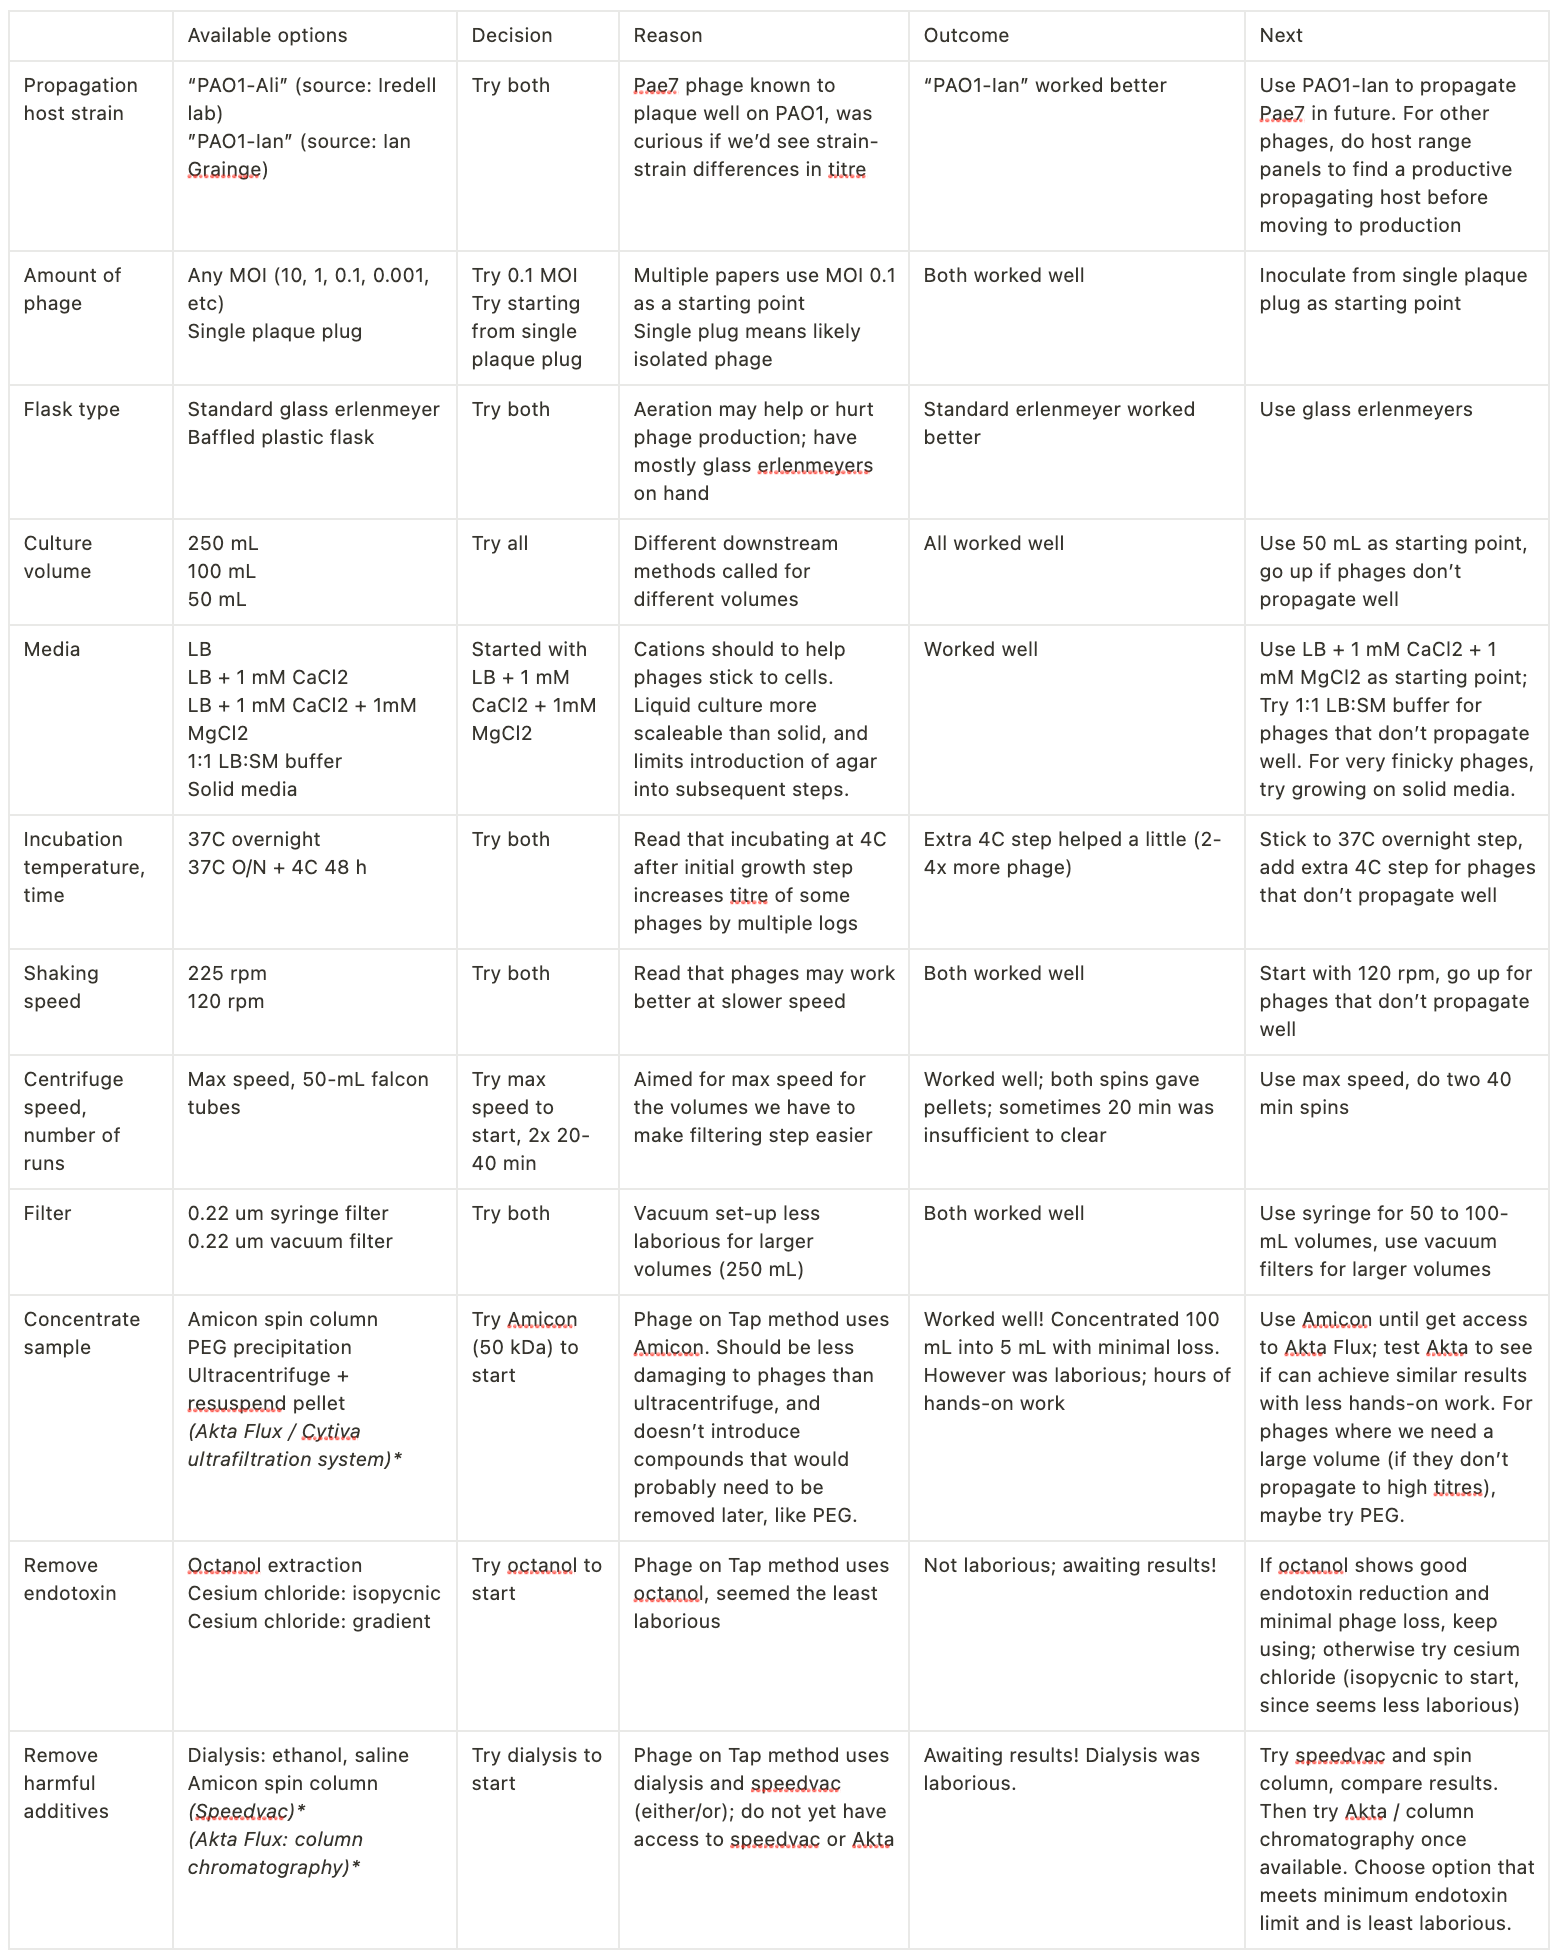 Table of Options & Processes